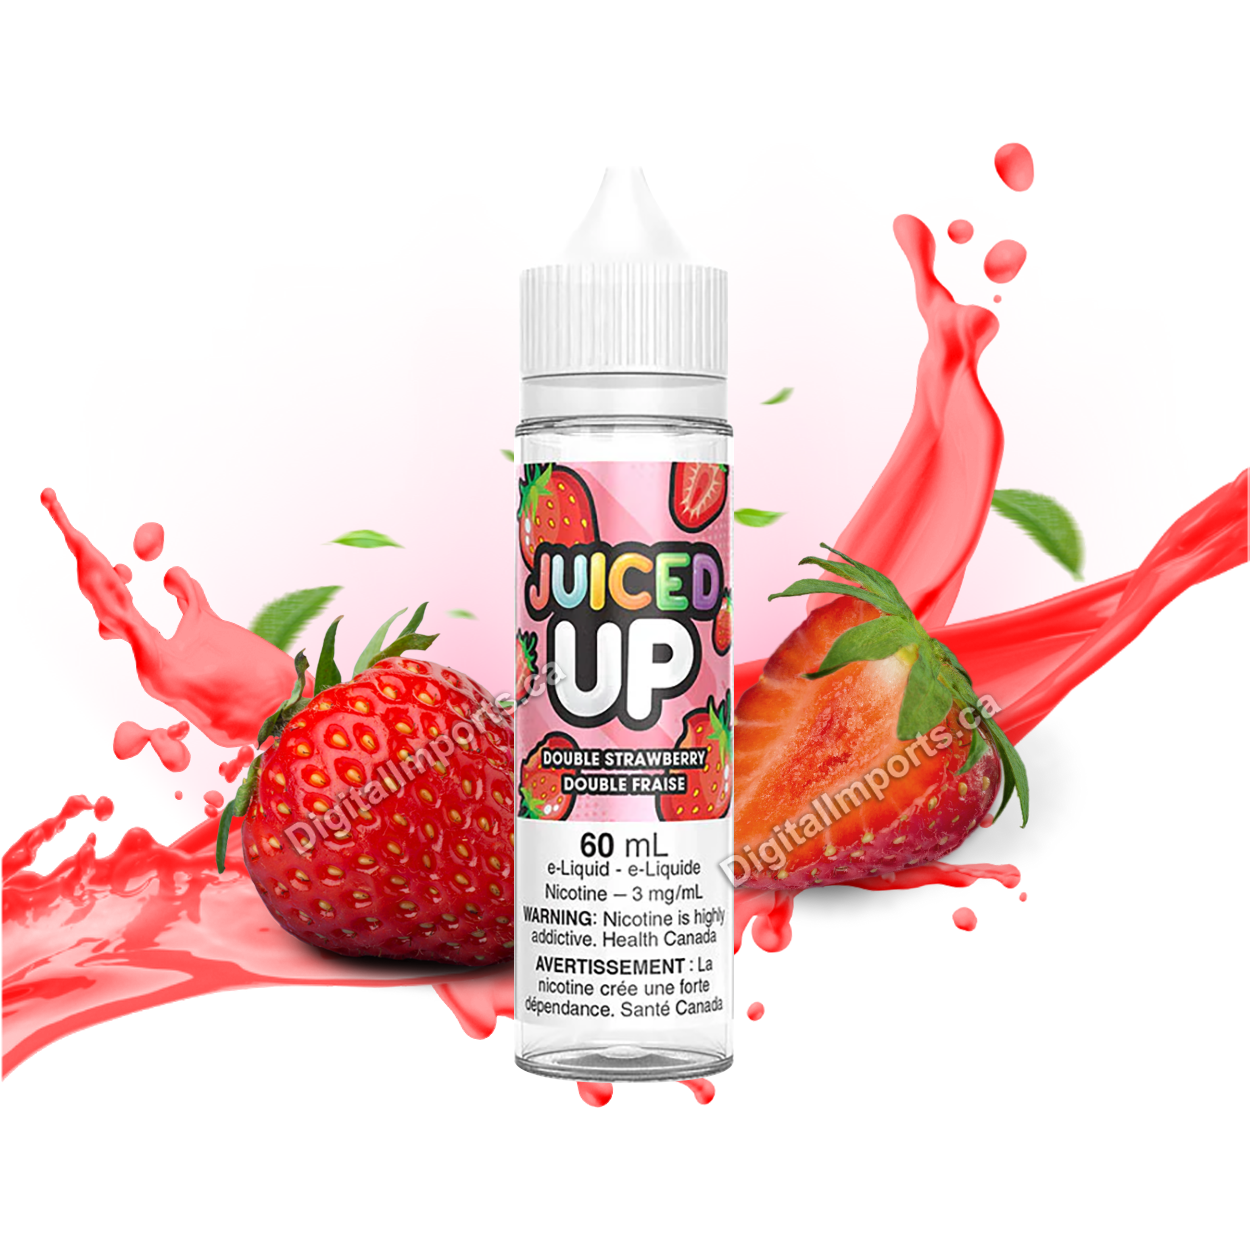 JUICED UP - DOUBLE STRAWBERRY